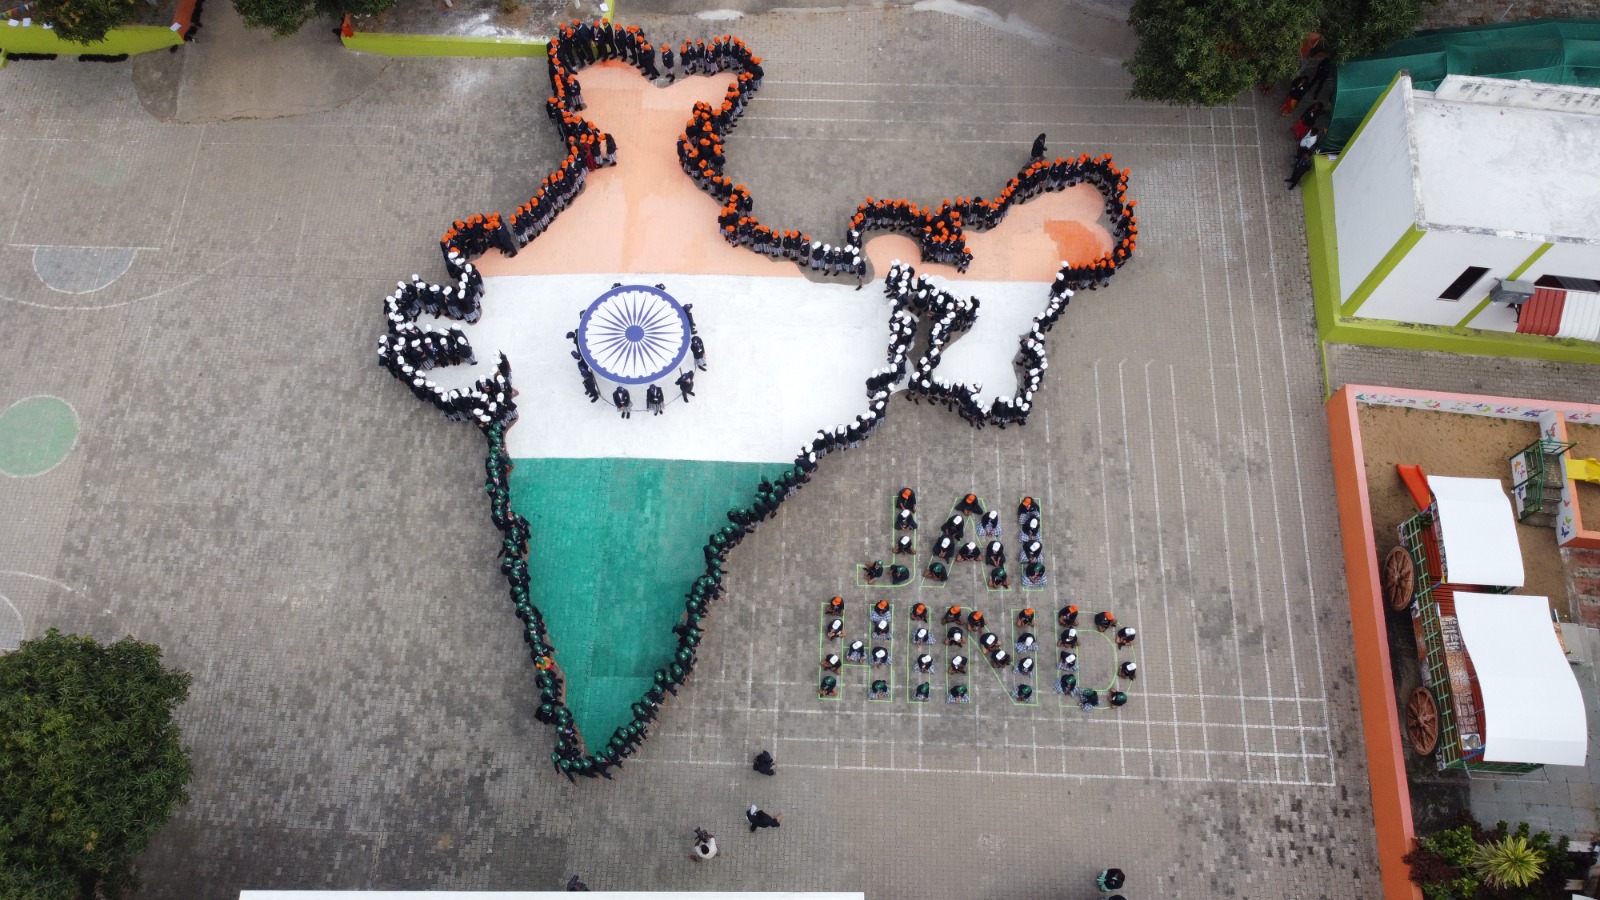 "For the First Time on India's 74th Republic day Ashirwad's International School  students reciting 465 articles of Indian constitution in many Indian Languages  and standing in the human portrait of Indian map"